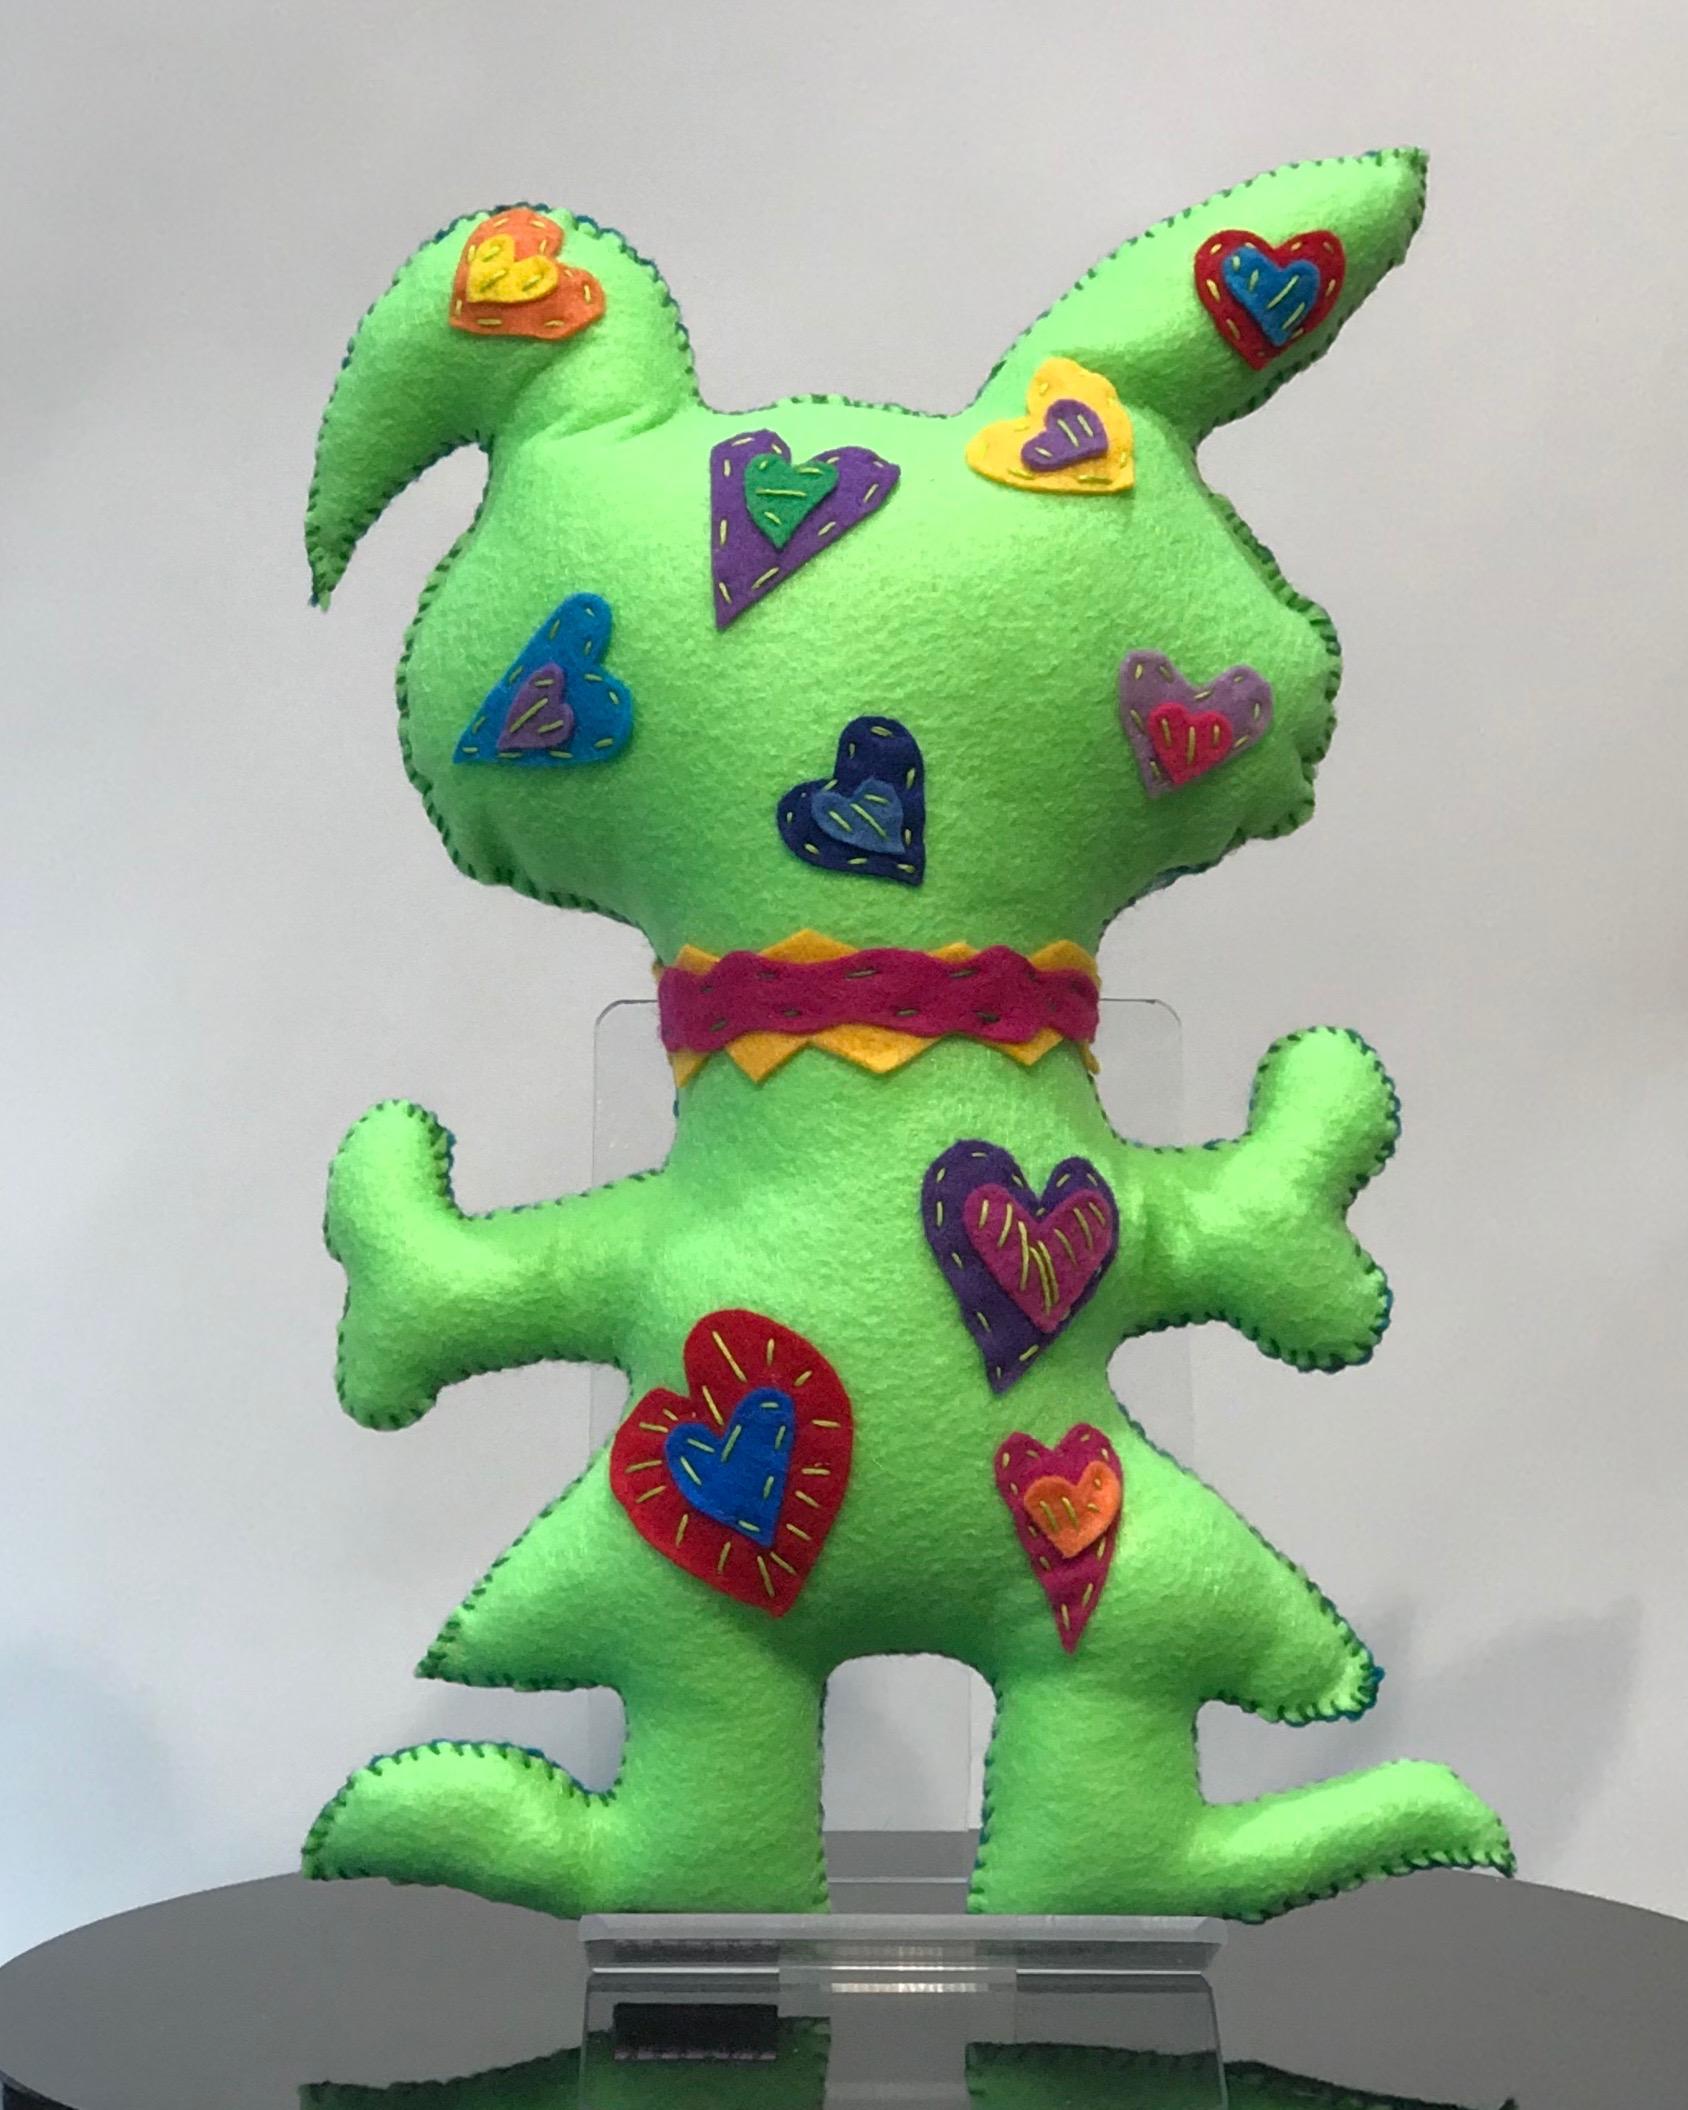 Teal and Lime Free Range Critter, soft sculpture, felt, recycled materials 1